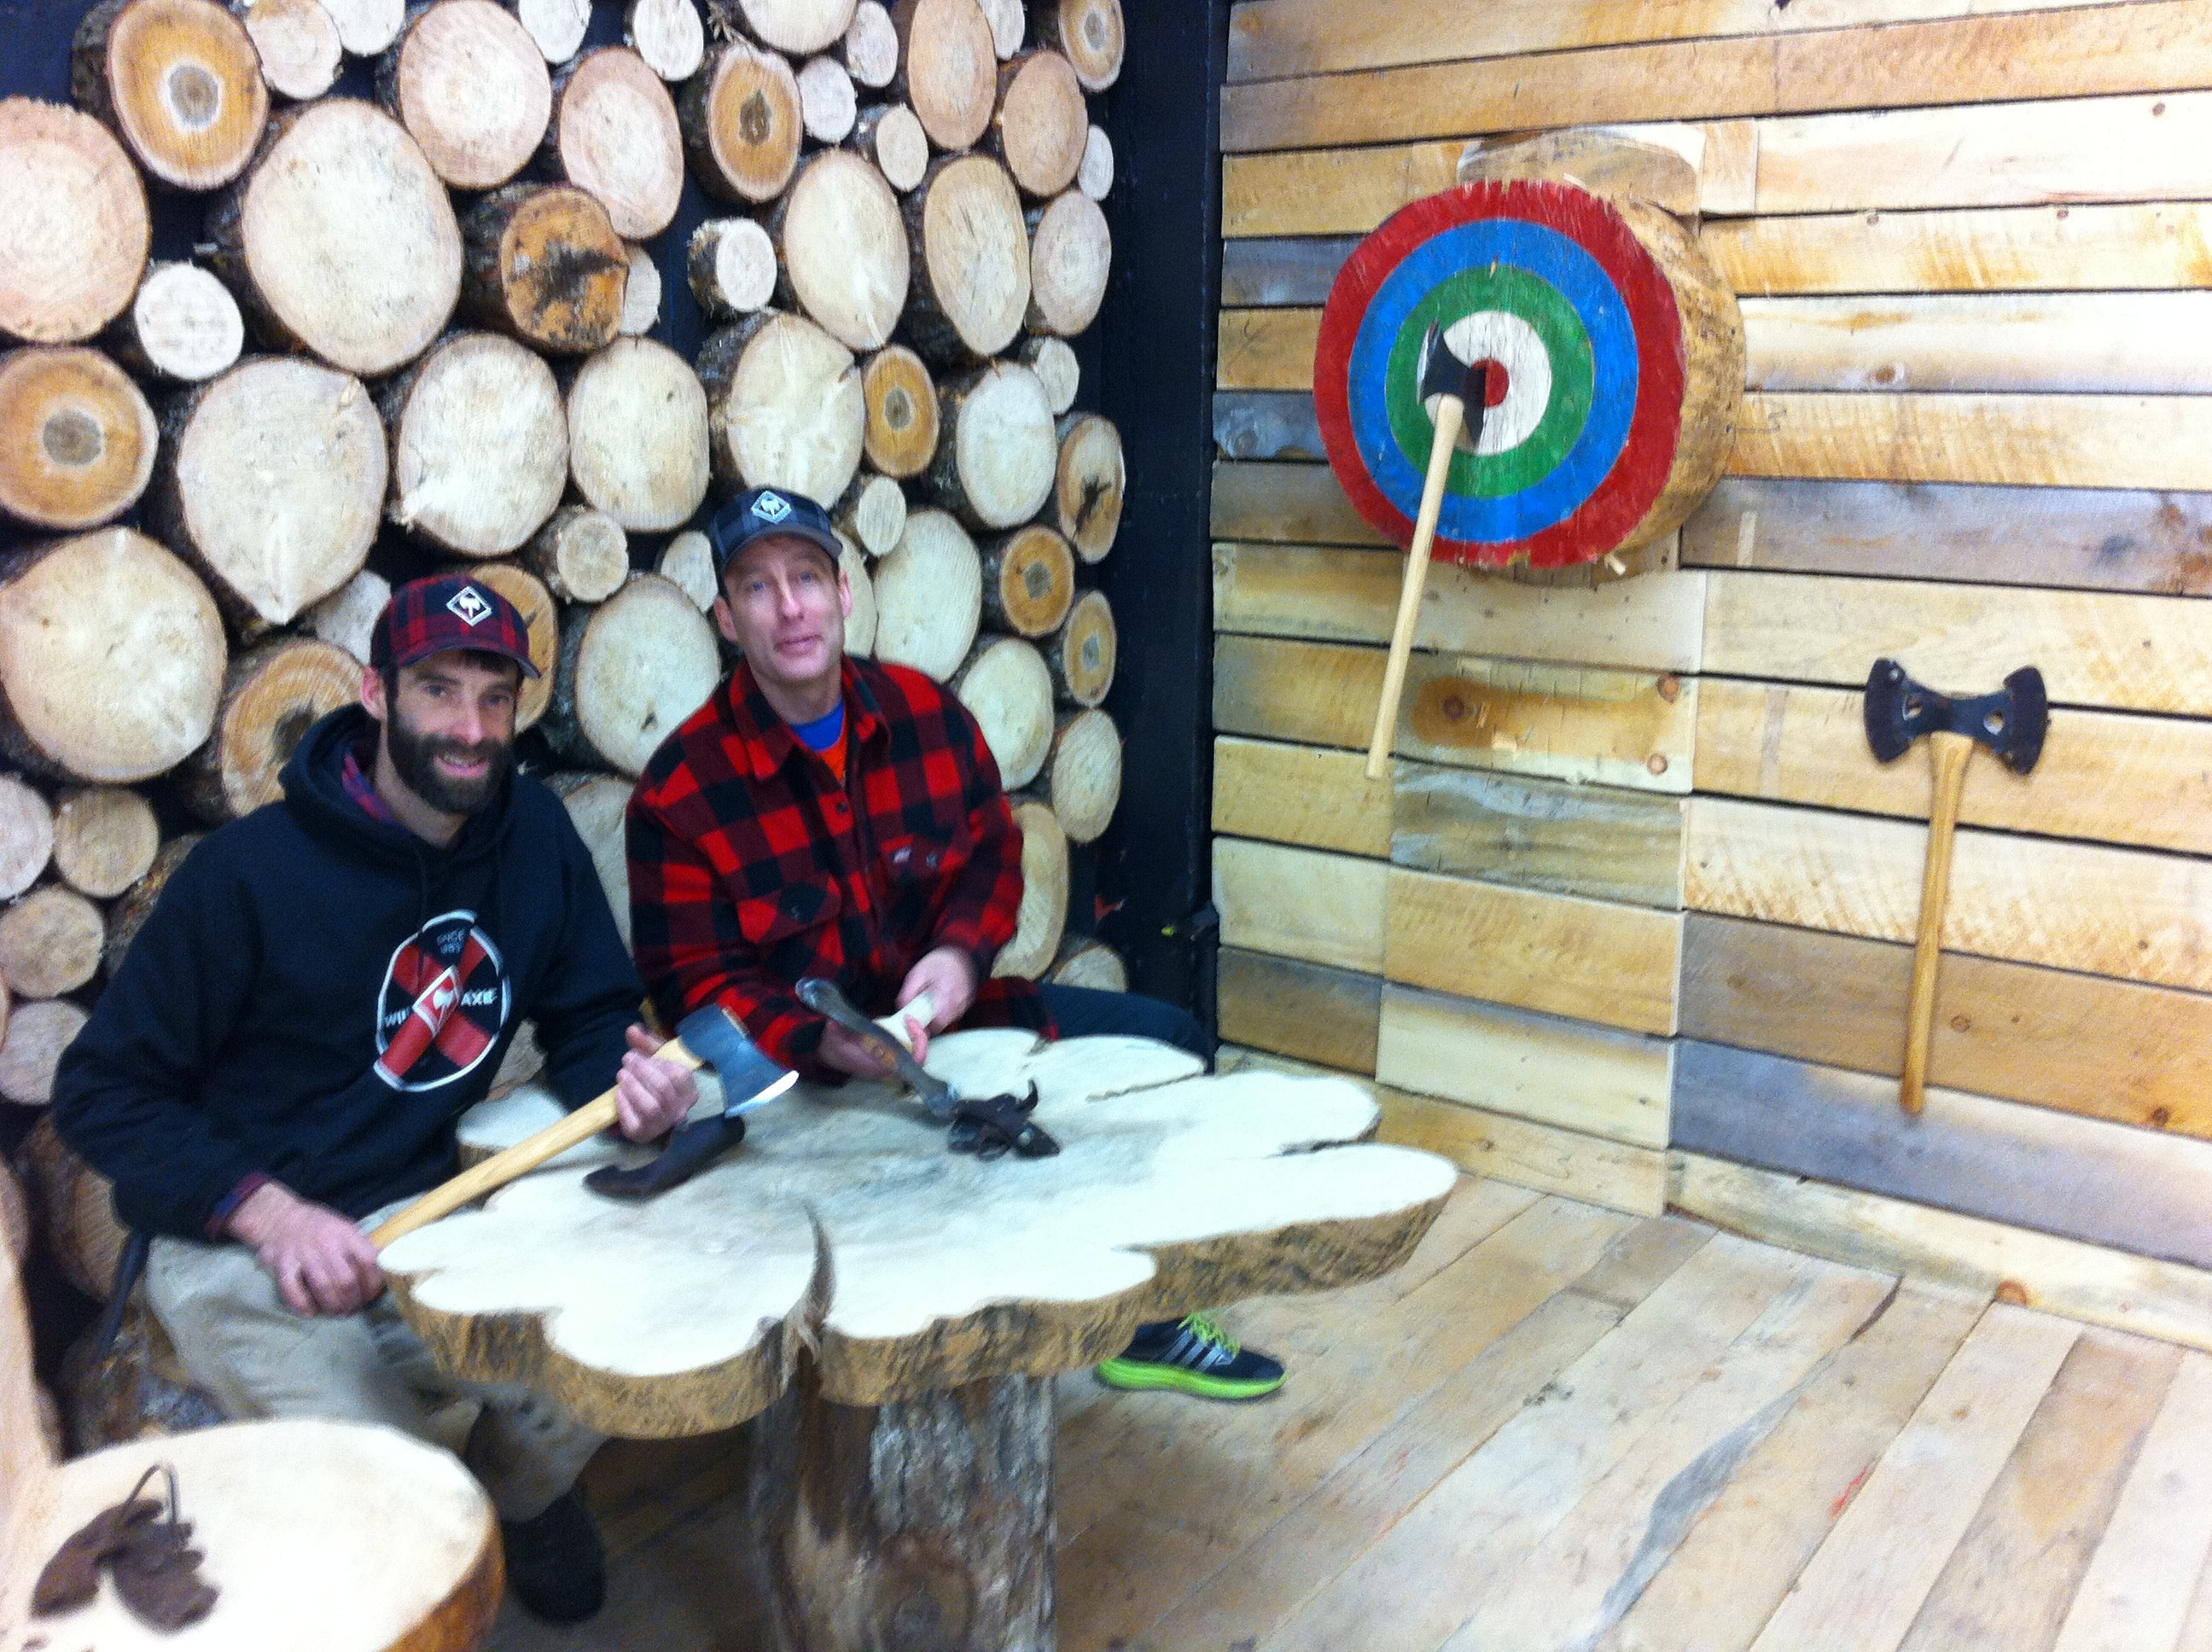 Timber Lounge brings axe throwing to Agricola Street